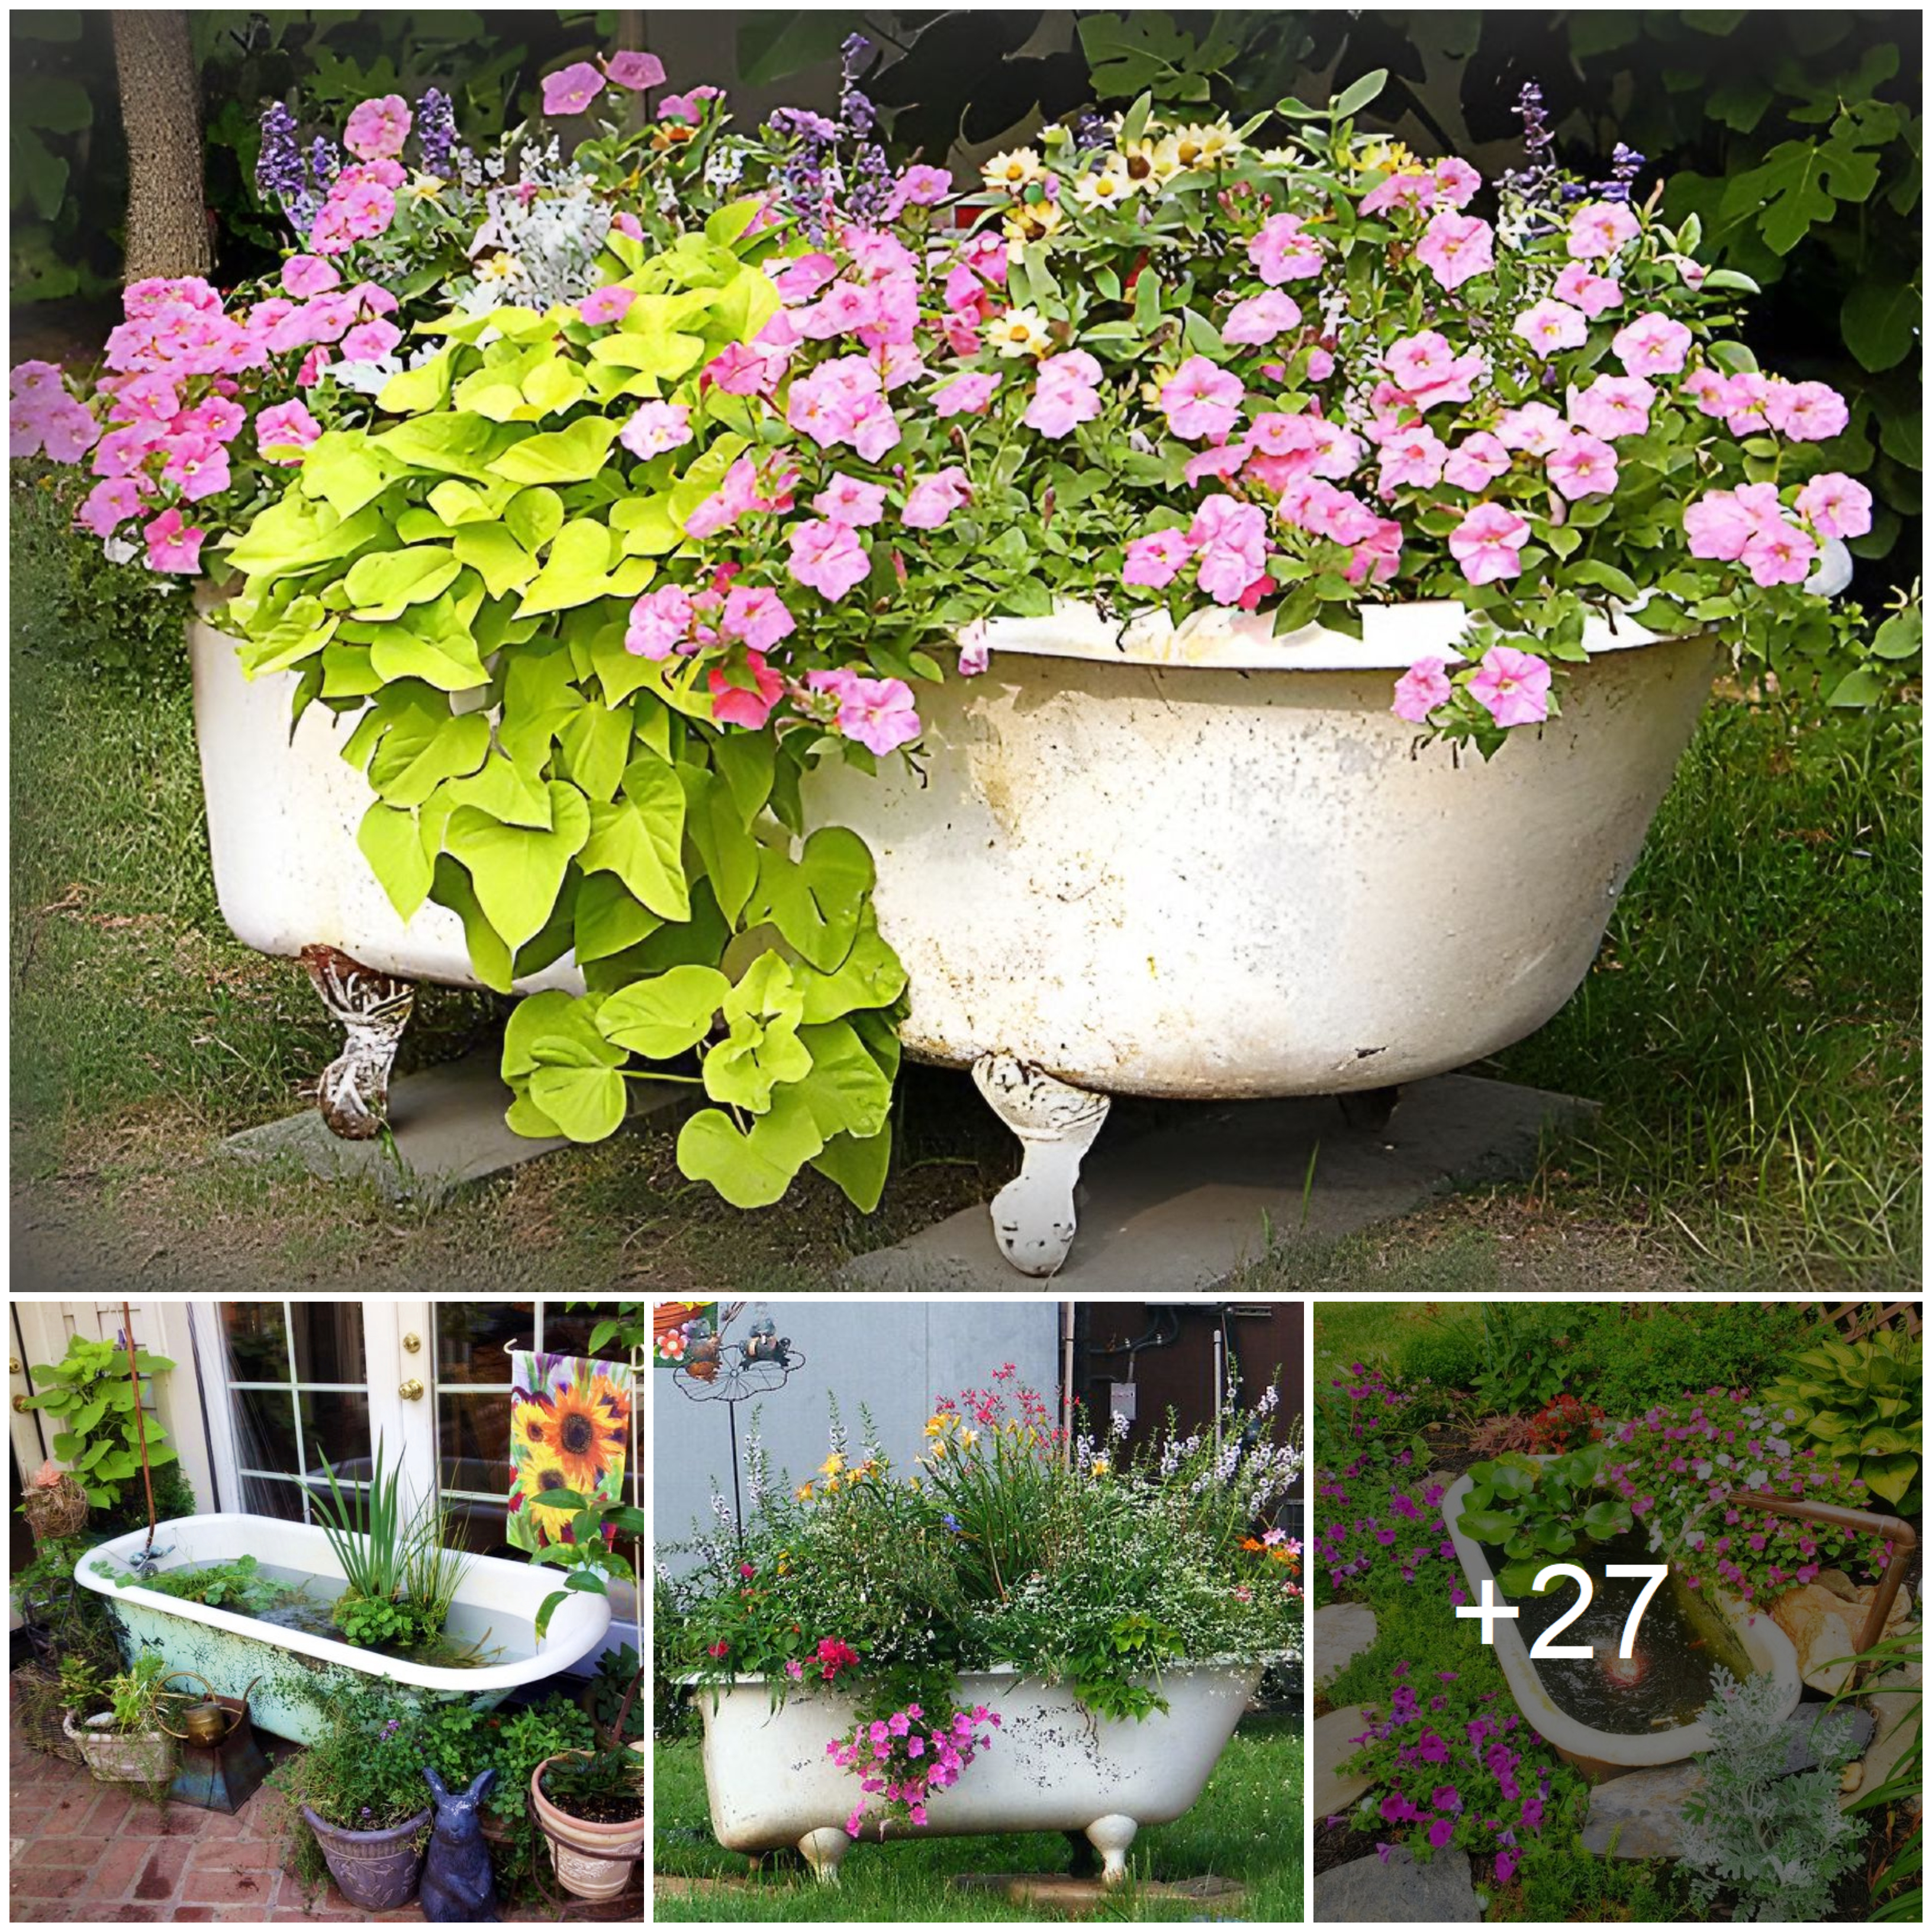 Using an old bathtub as a container in your garden